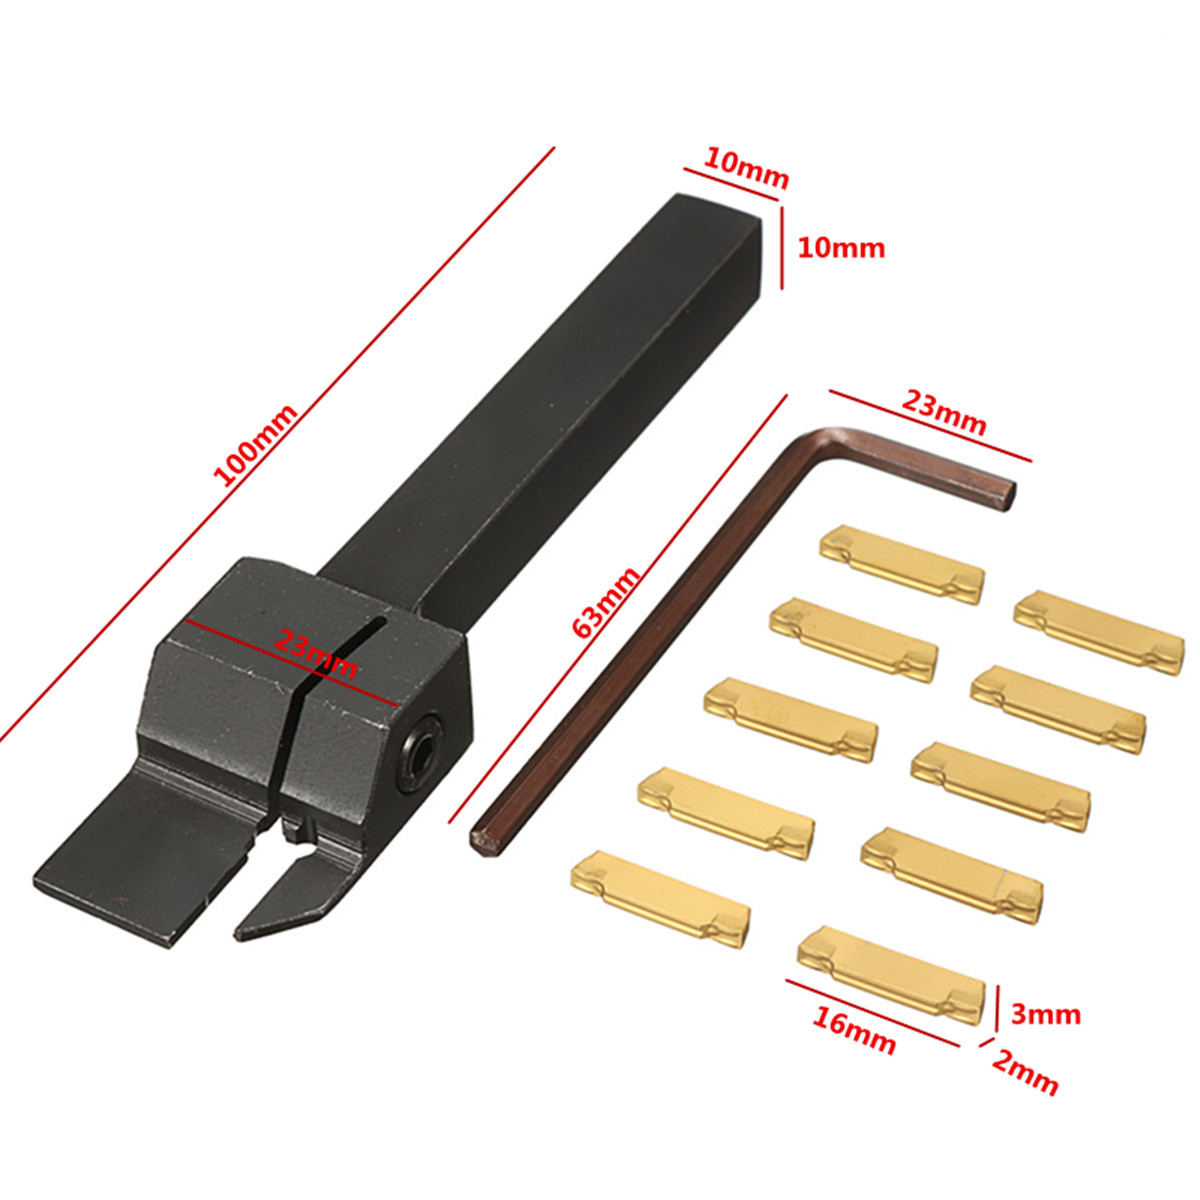 MGEHR-1010-2-10x10-x100mm-Grooving-Tool-Holder-With-10pcs-MGMN200-Insert-Blade-For-2mm-Cut-1029279-1